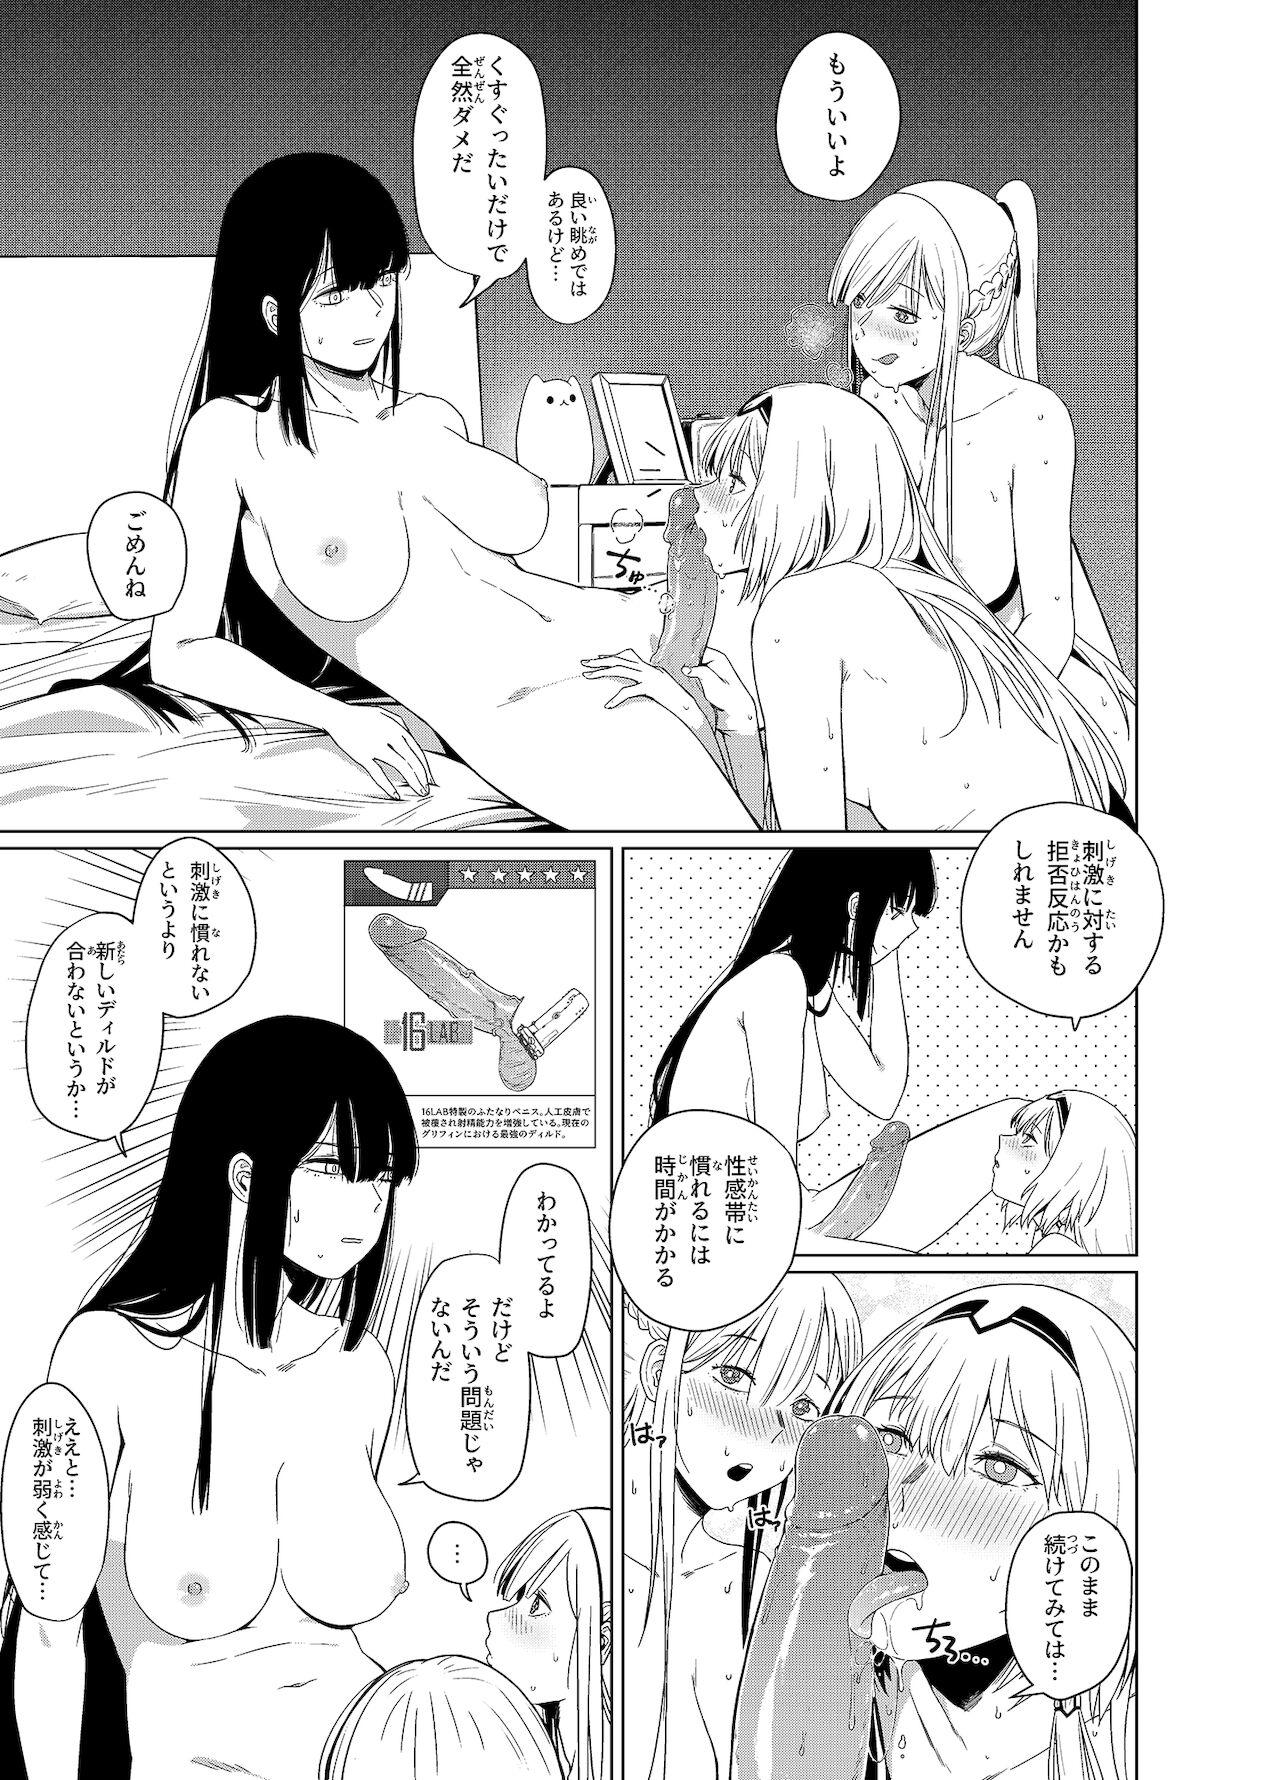 Juicy カリナのナイショのおみせ Part.2 - Girls frontline Behind - Page 5